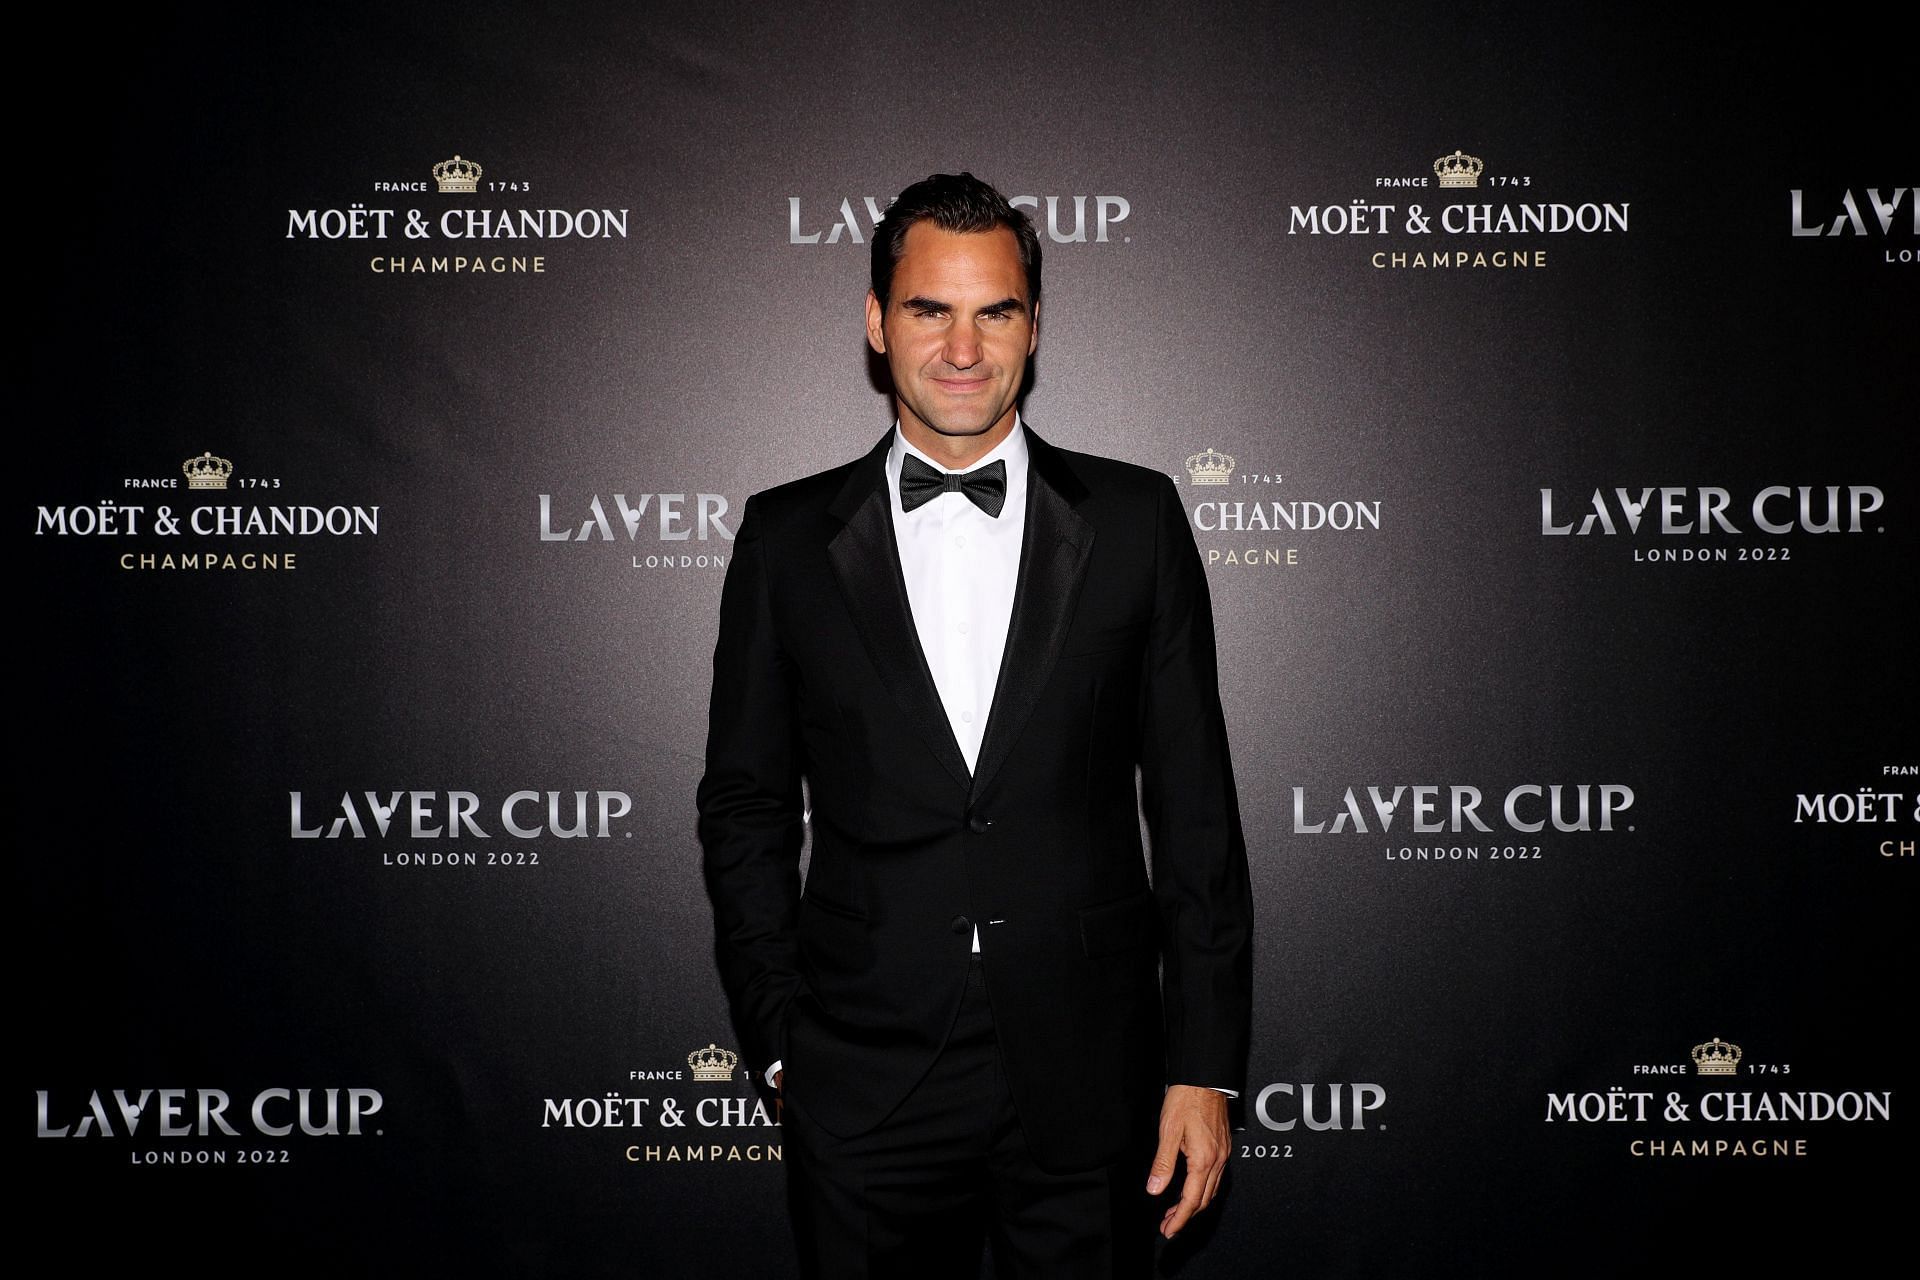 Federer explores the world in new series '24 hours with Roger'